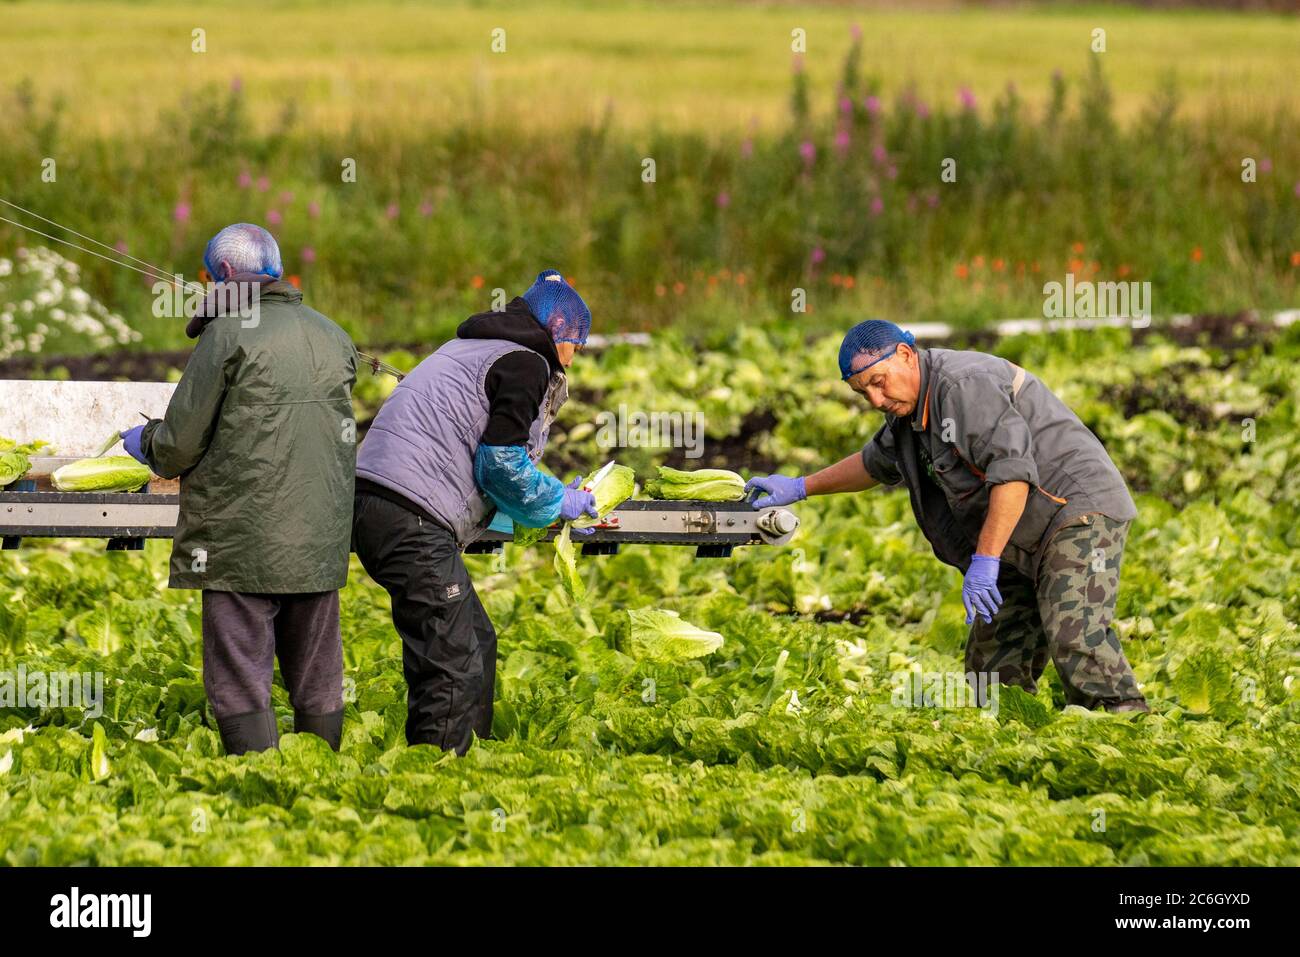 Summer Lettuce harvesting in Tarleton, Lancashire. July, 2020. UK Weather. EU migrant workers harvesting lettuce on sunny showery morning in the area known as 'The Salad Bowl' of West Lancashire. Farms have been hit with a shortage of the European migrant workers that Britain relies on to bring in the vegetable and salad crops. This shortage means that local arms are now pooling workers, transporting them from farm to farm as required. The UK requires about 80,000 seasonal workers to pick the vegetable harvest and virtually all come from Eastern Europe. Stock Photo